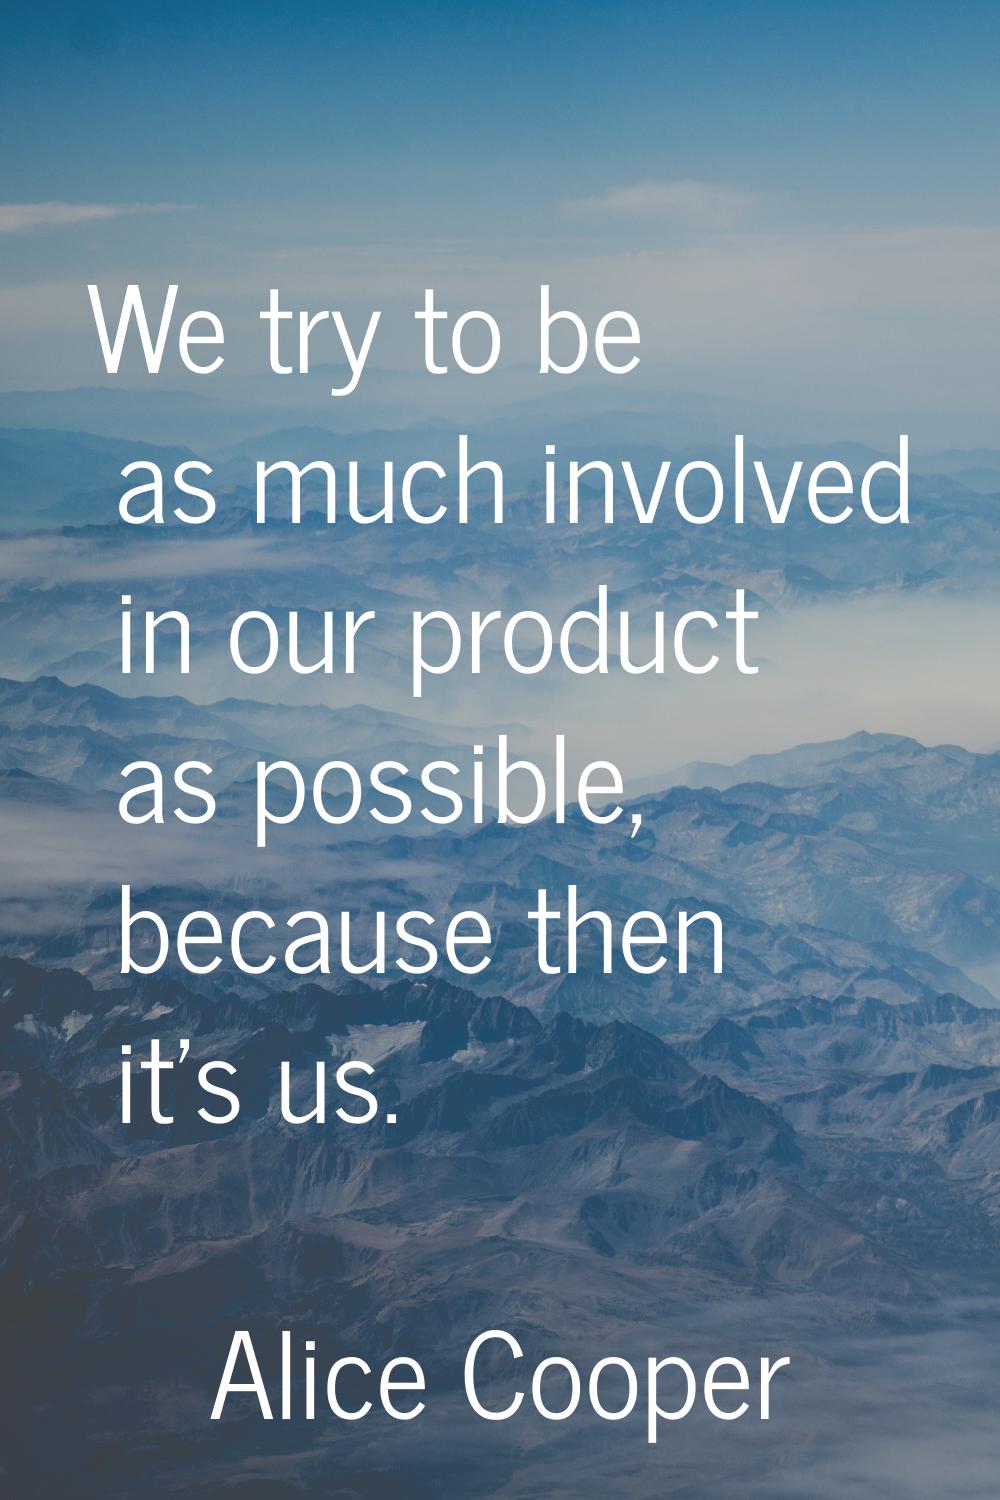 We try to be as much involved in our product as possible, because then it's us.